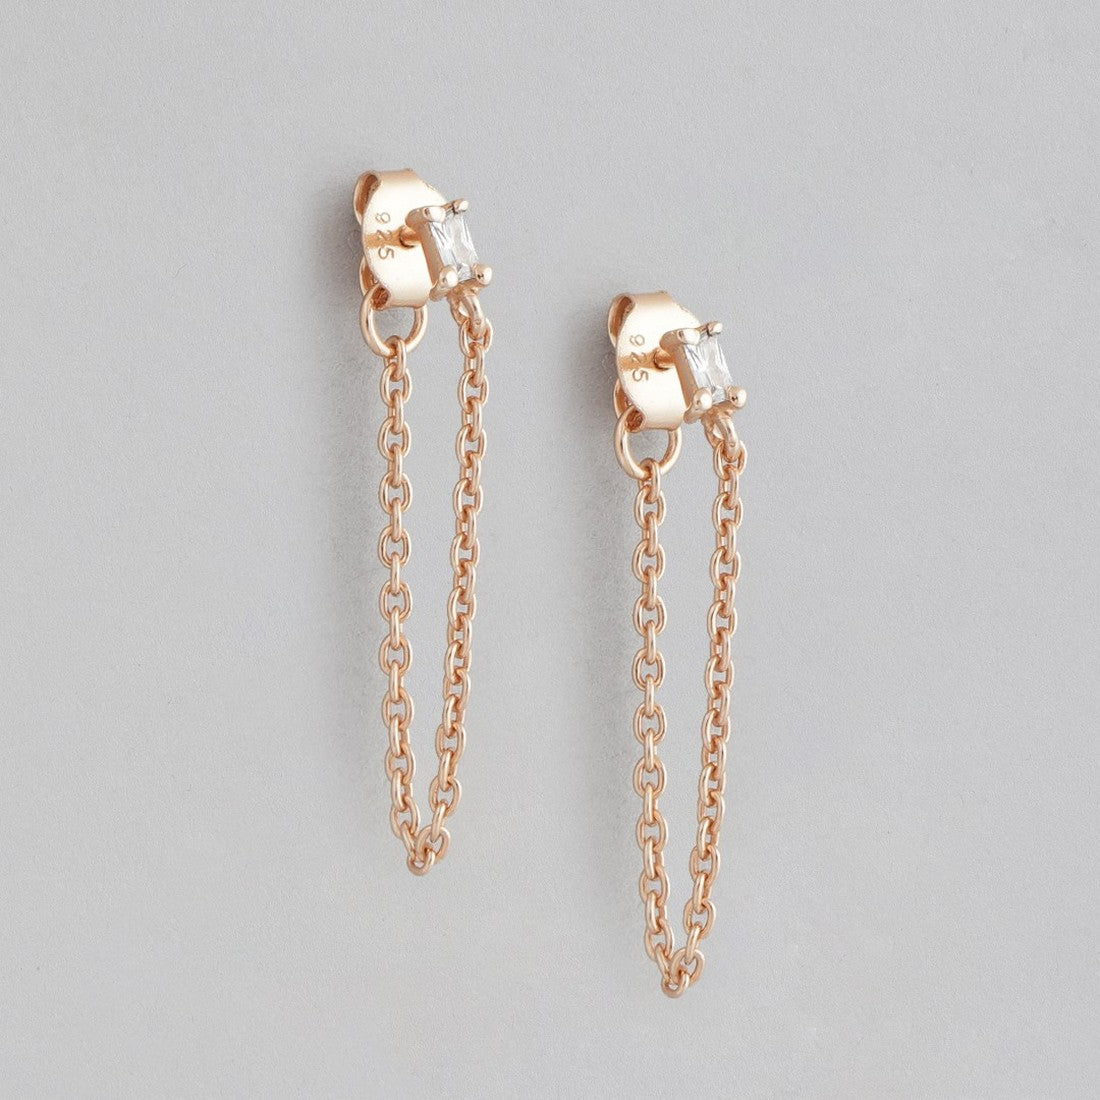 Hanging Chain CZ Rose Gold Plated 925 Sterling Silver Earrings